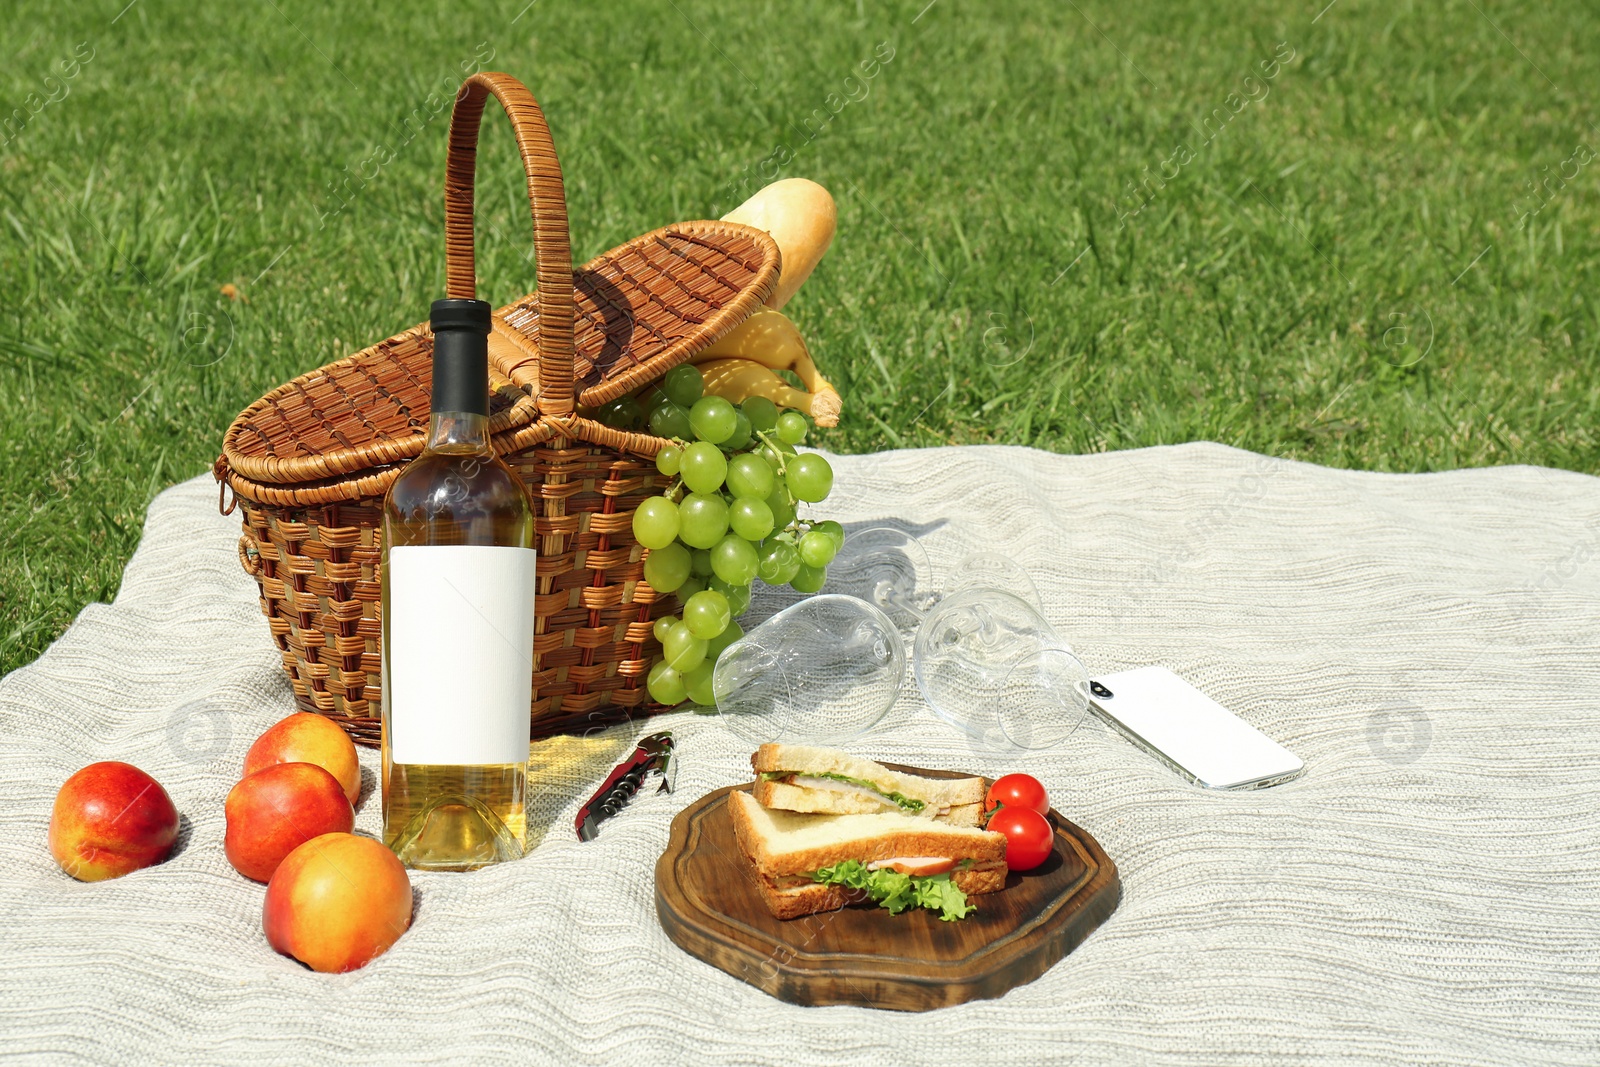 Photo of Basket with food and wineglasses on blanket prepared for picnic in park